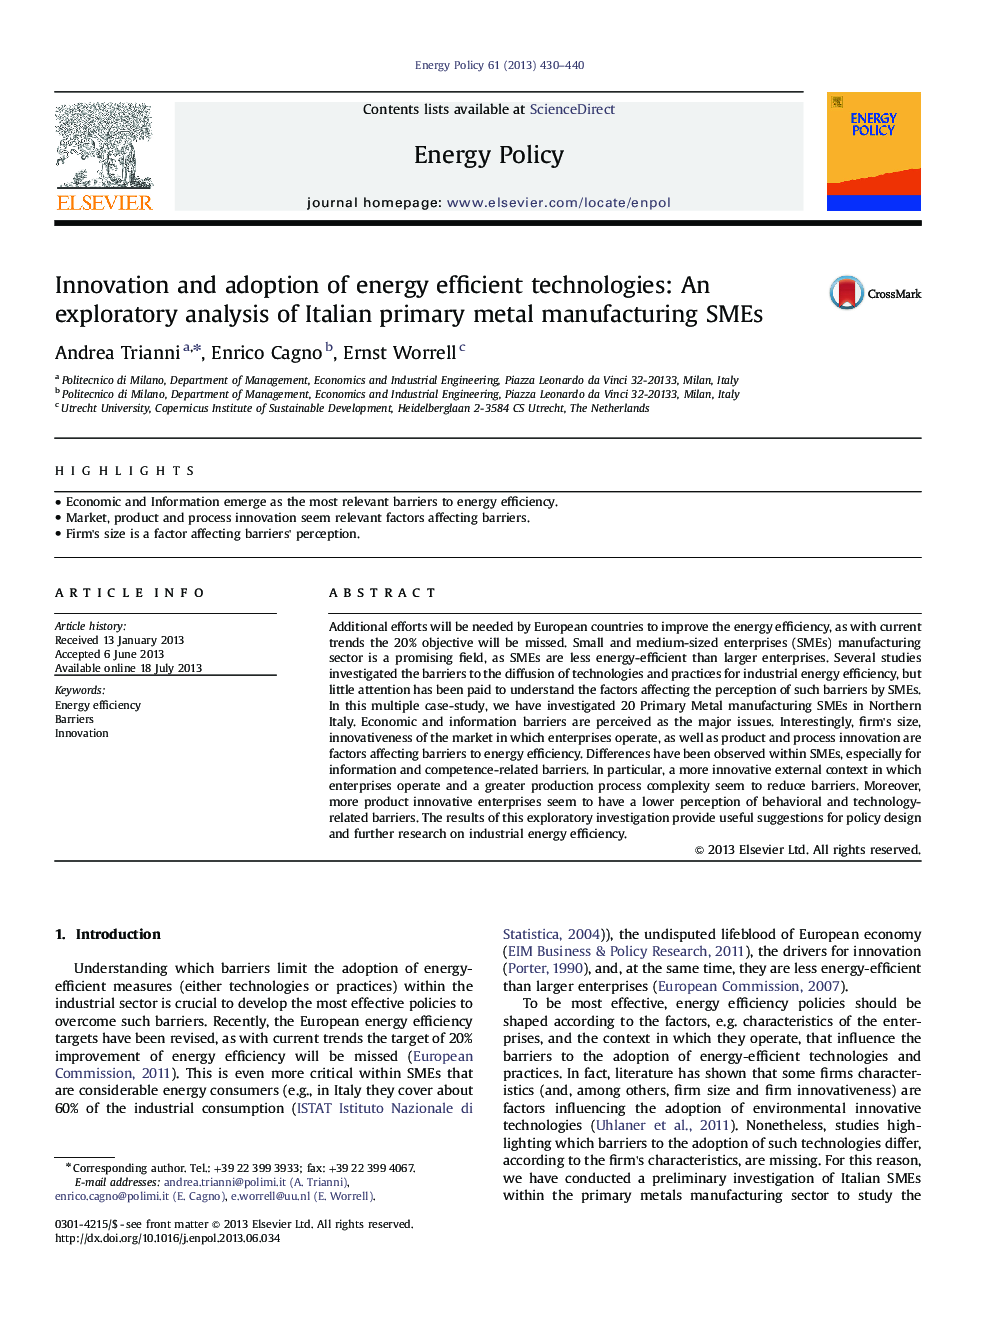 Innovation and adoption of energy efficient technologies: An exploratory analysis of Italian primary metal manufacturing SMEs